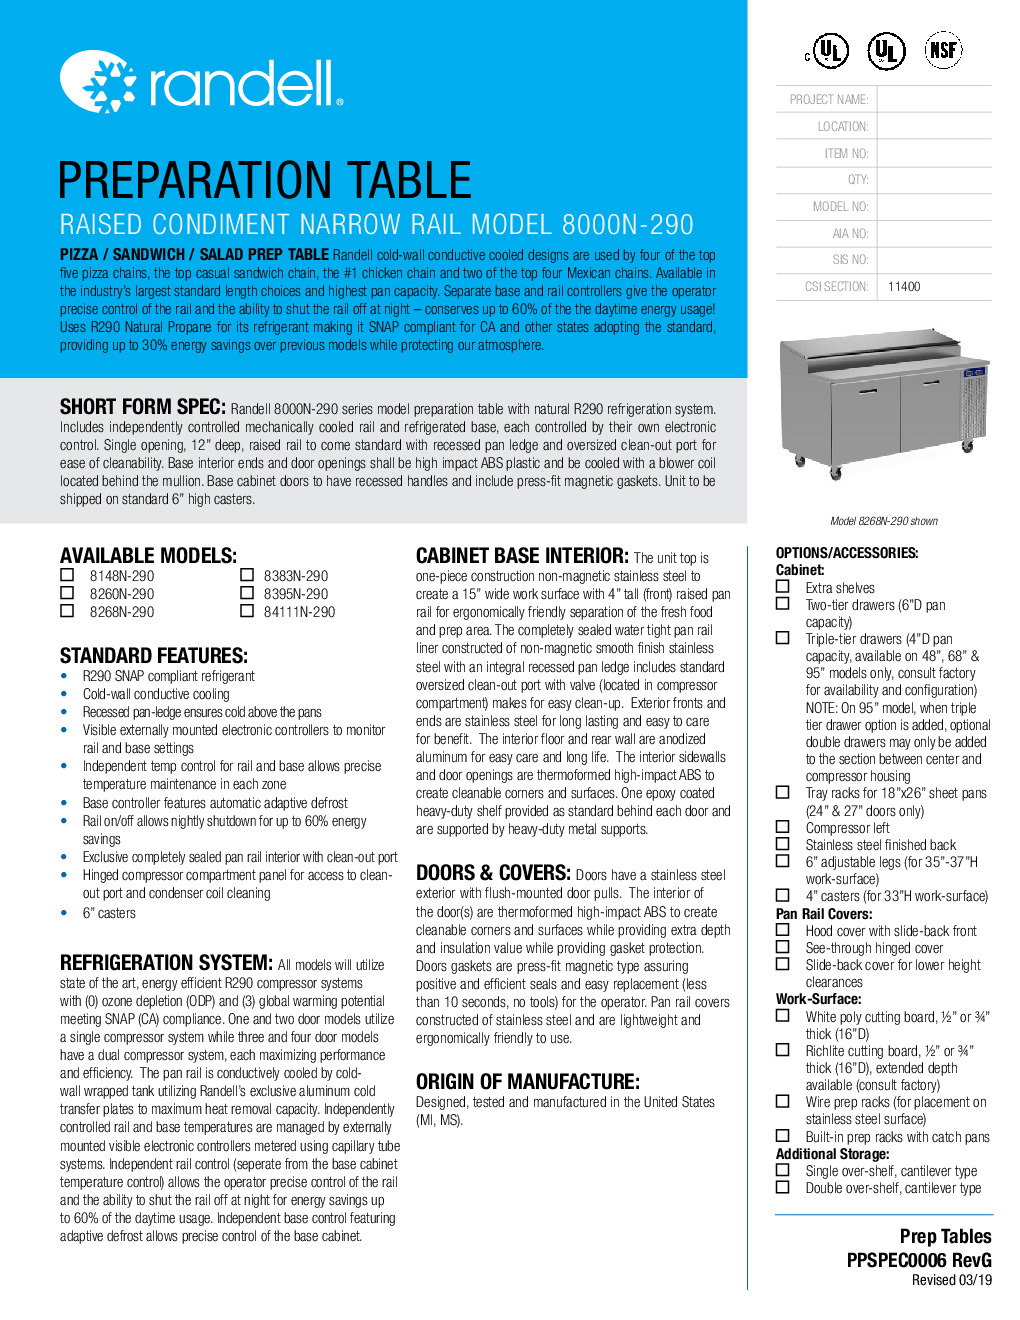 Randell 8395N-290-PCB Pizza Prep Table Refrigerated Counter